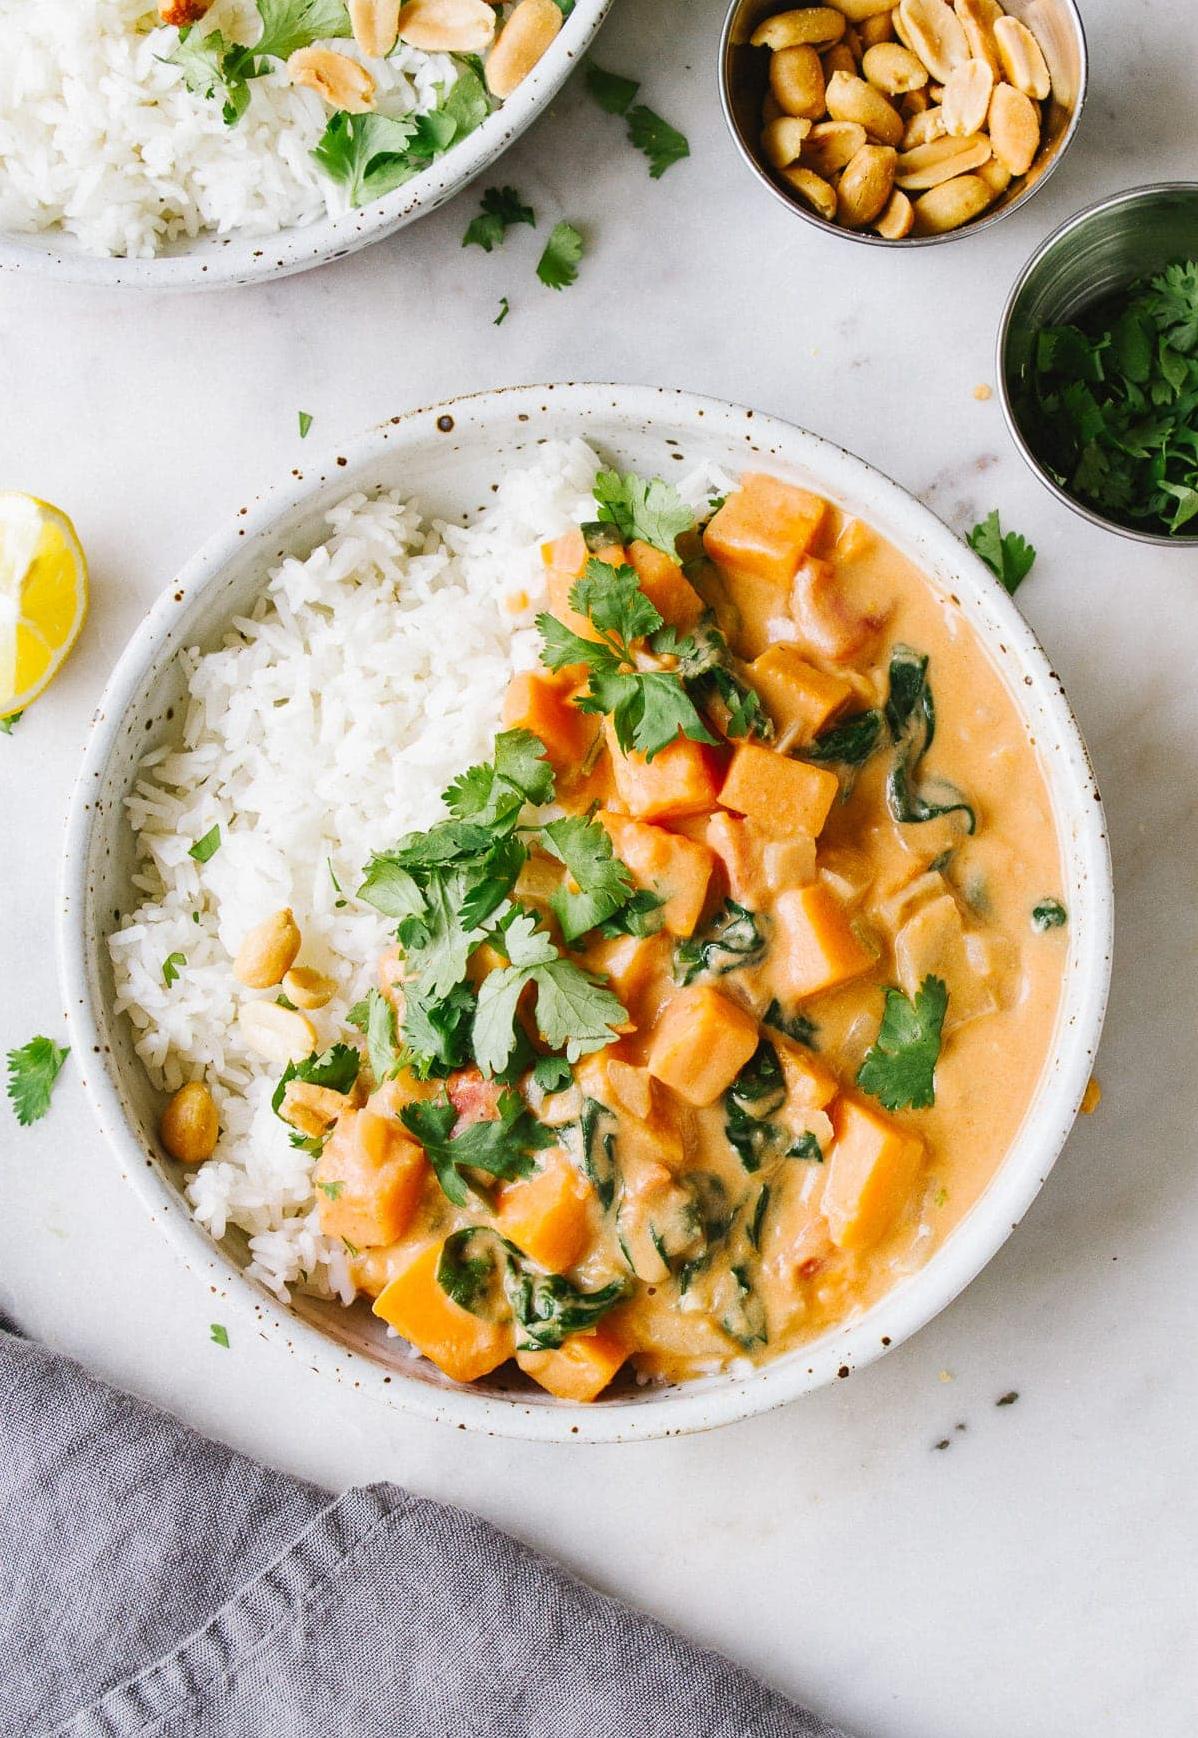  This deliciously creamy curry is packed with nutritious veggies and plant-based protein.